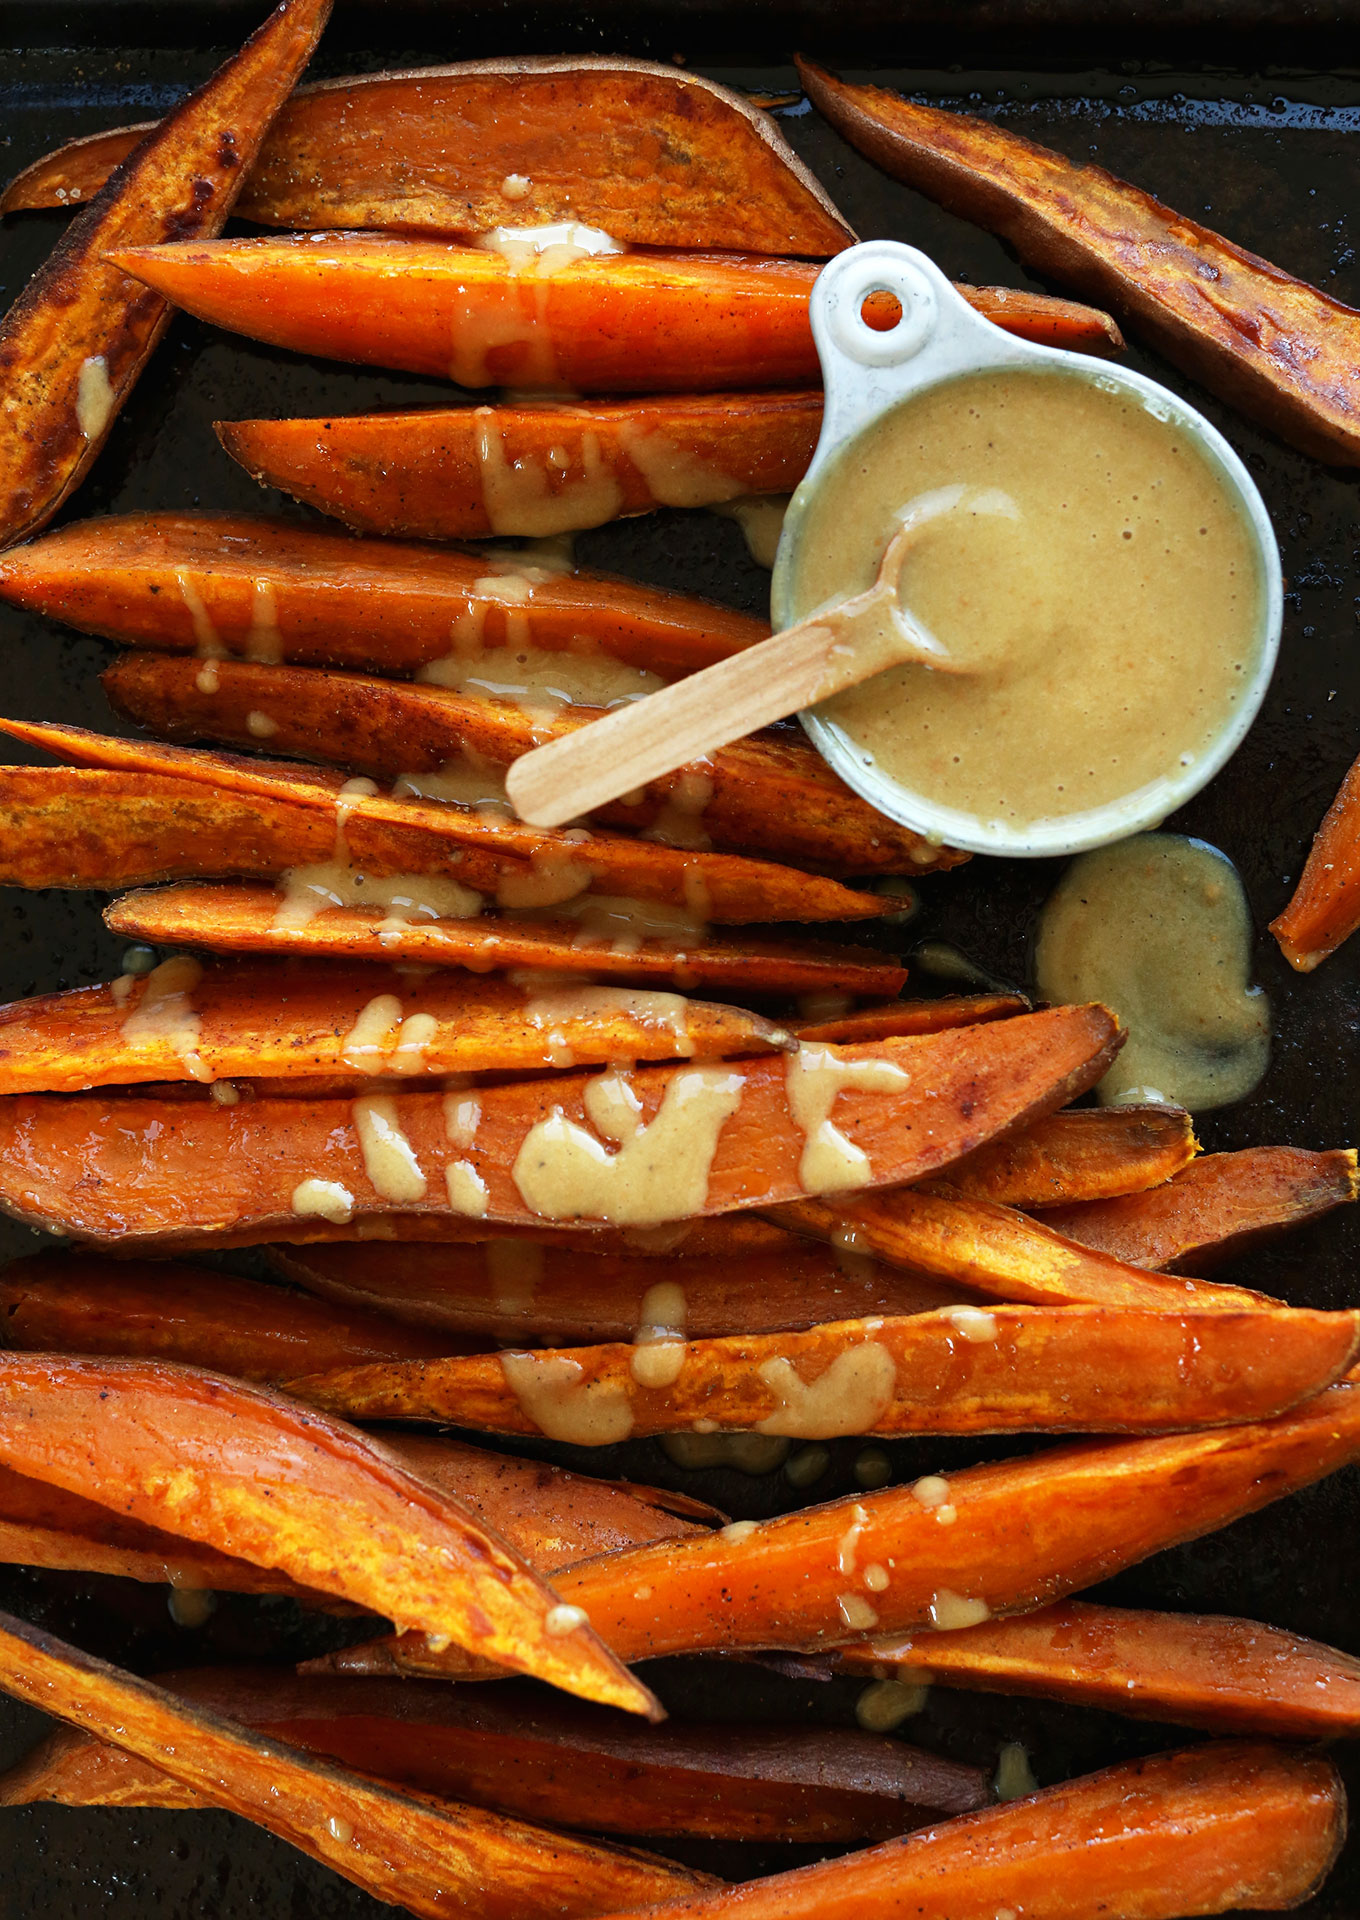 Baking sheet of Roasted Sweet Potato Wedges drizzled with No-Honey Mustard Dipping Sauce